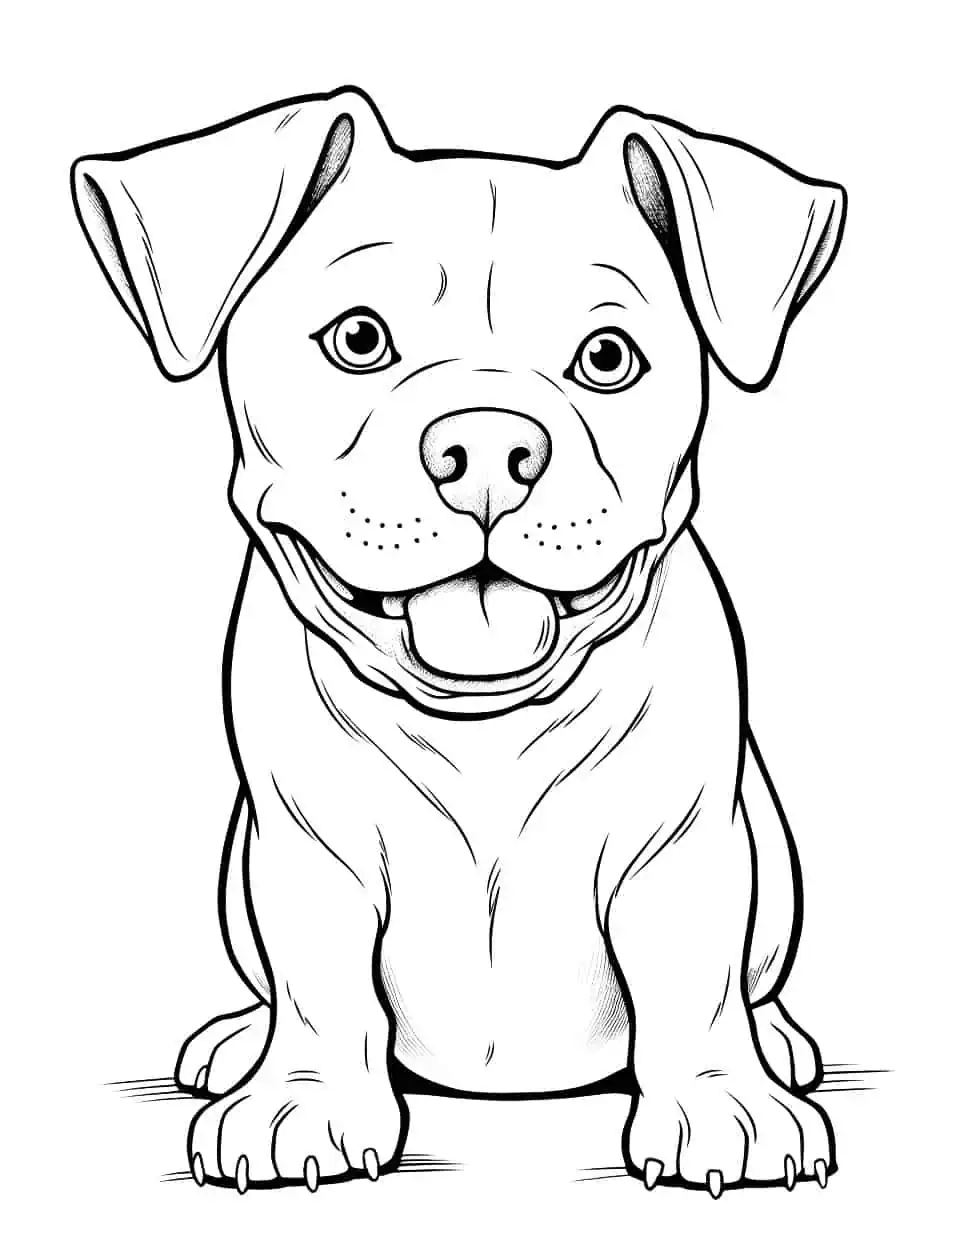 Easy Pitbull Portrait Coloring Page - An easy to color, simplistic outline of a friendly Pitbull.